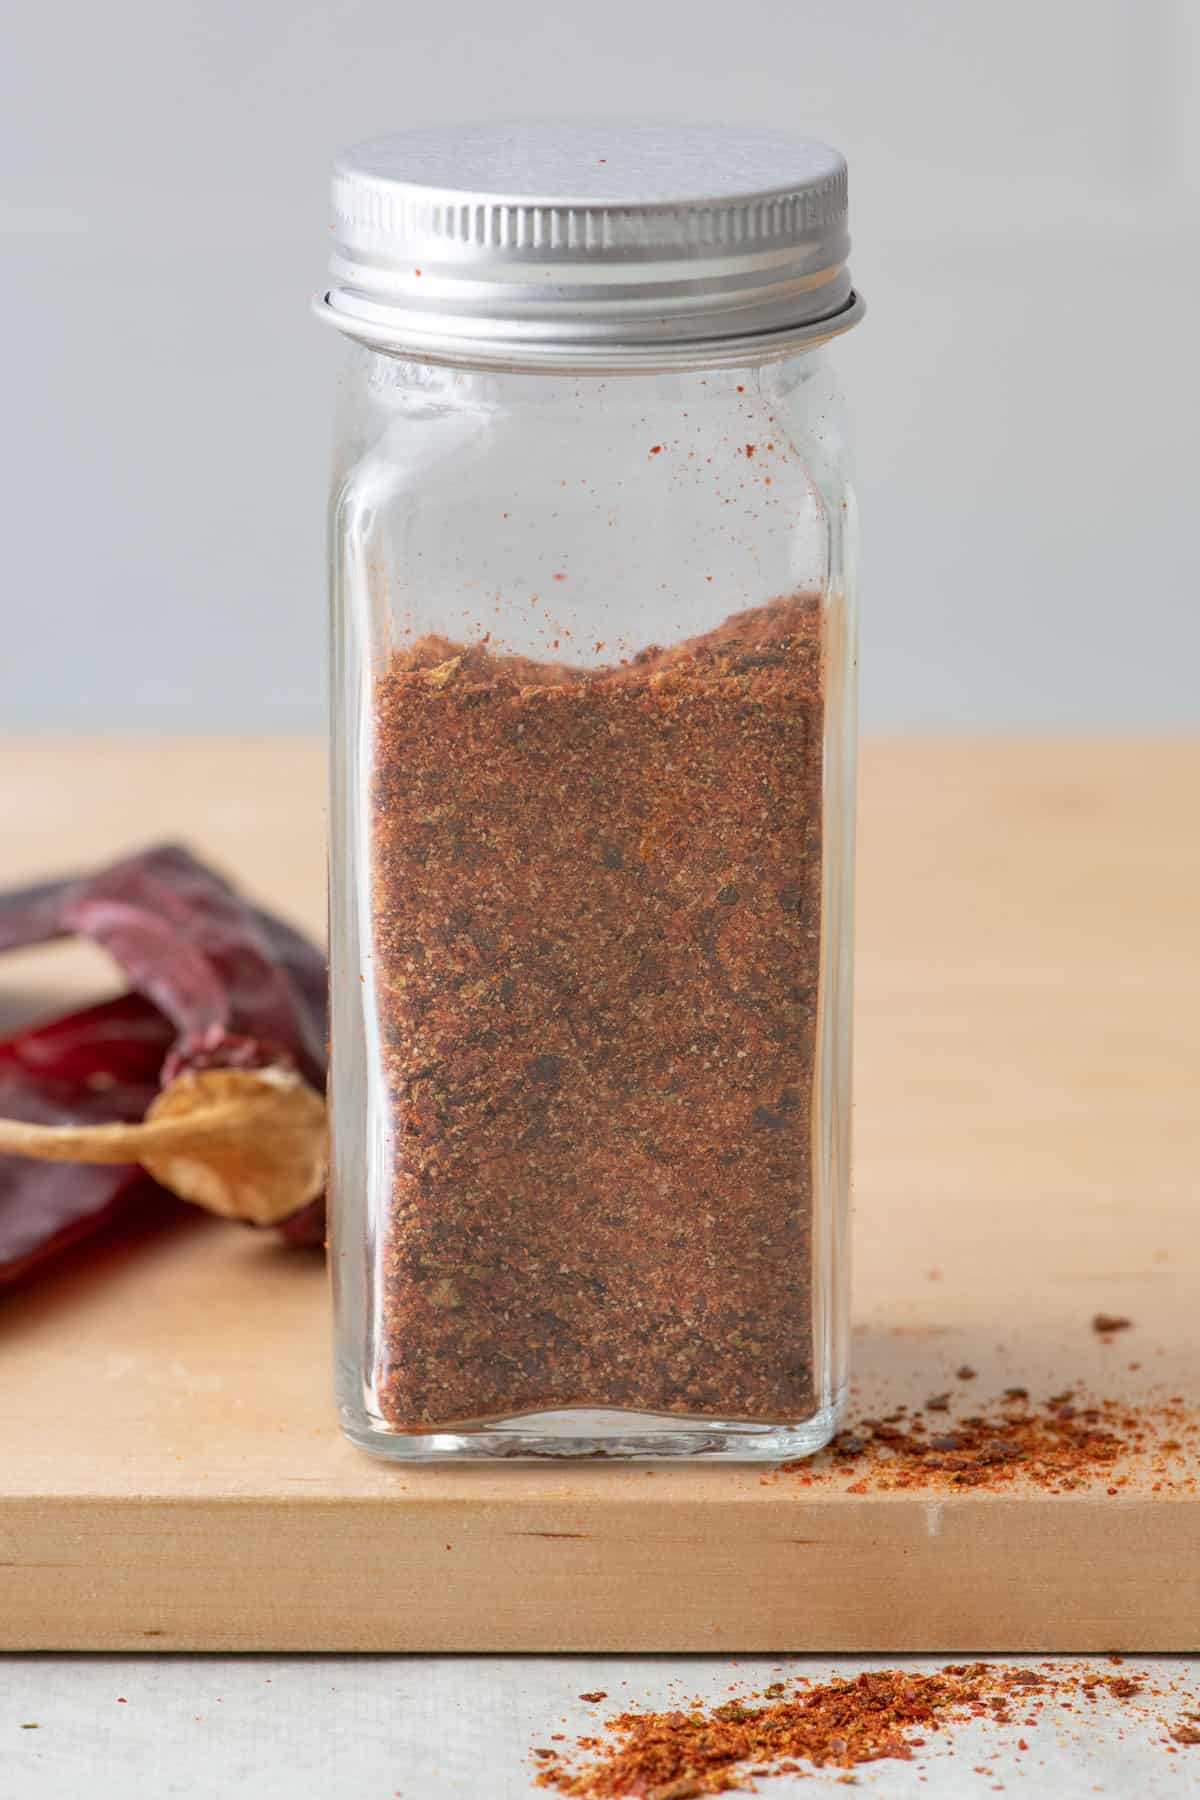 https://feelgoodfoodie.net/wp-content/uploads/2023/04/How-to-Make-Chili-Powder-07.jpg